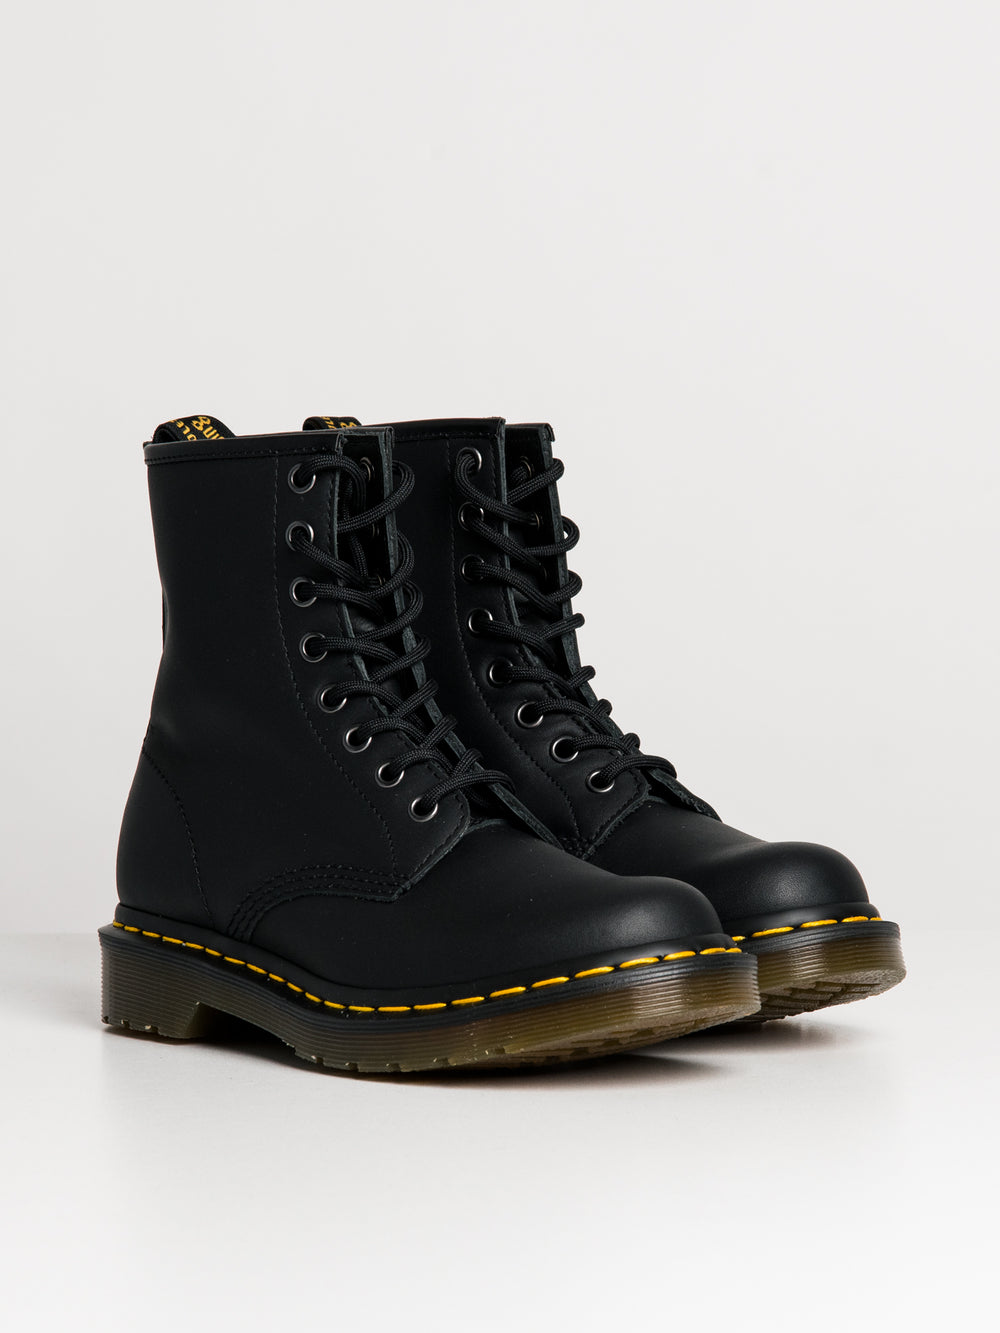 WOMENS DR MARTENS NAPPA LEATHER LACE UP BOOTS